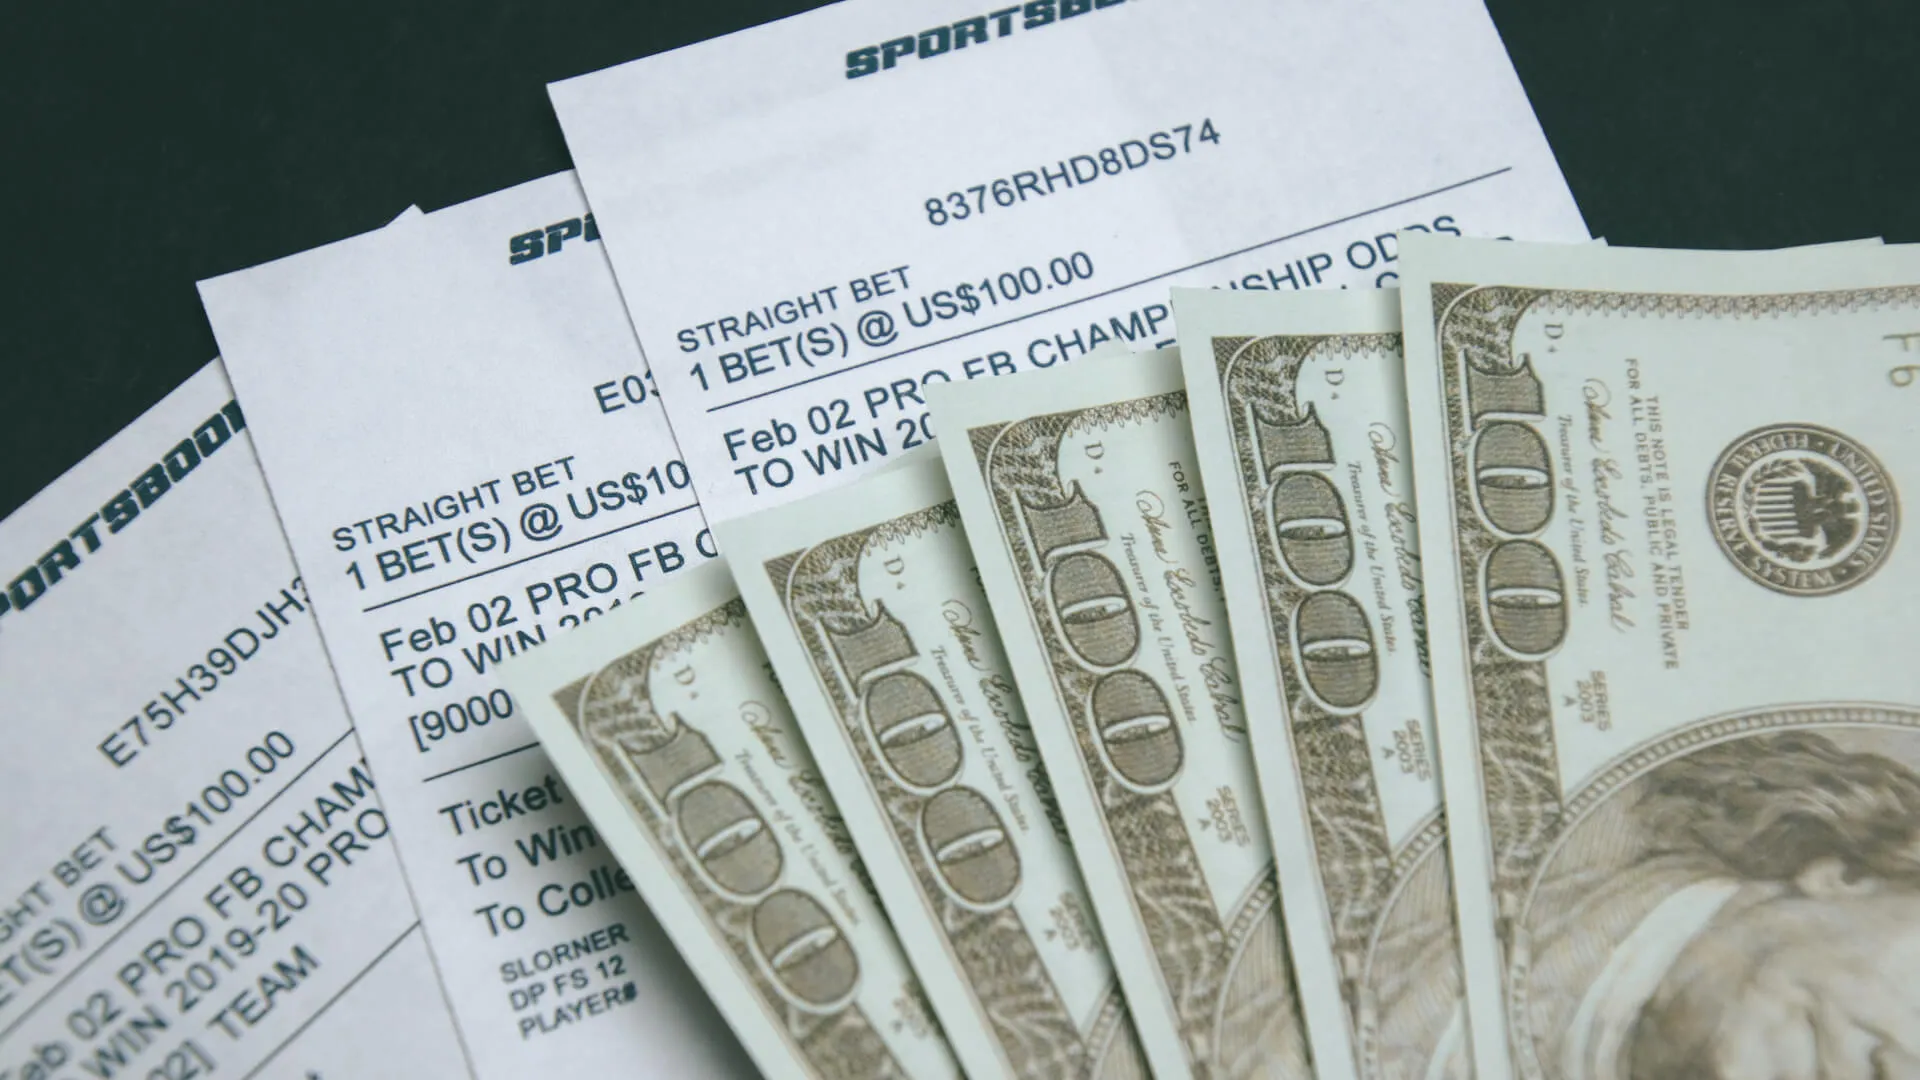 The business of betting on sports.